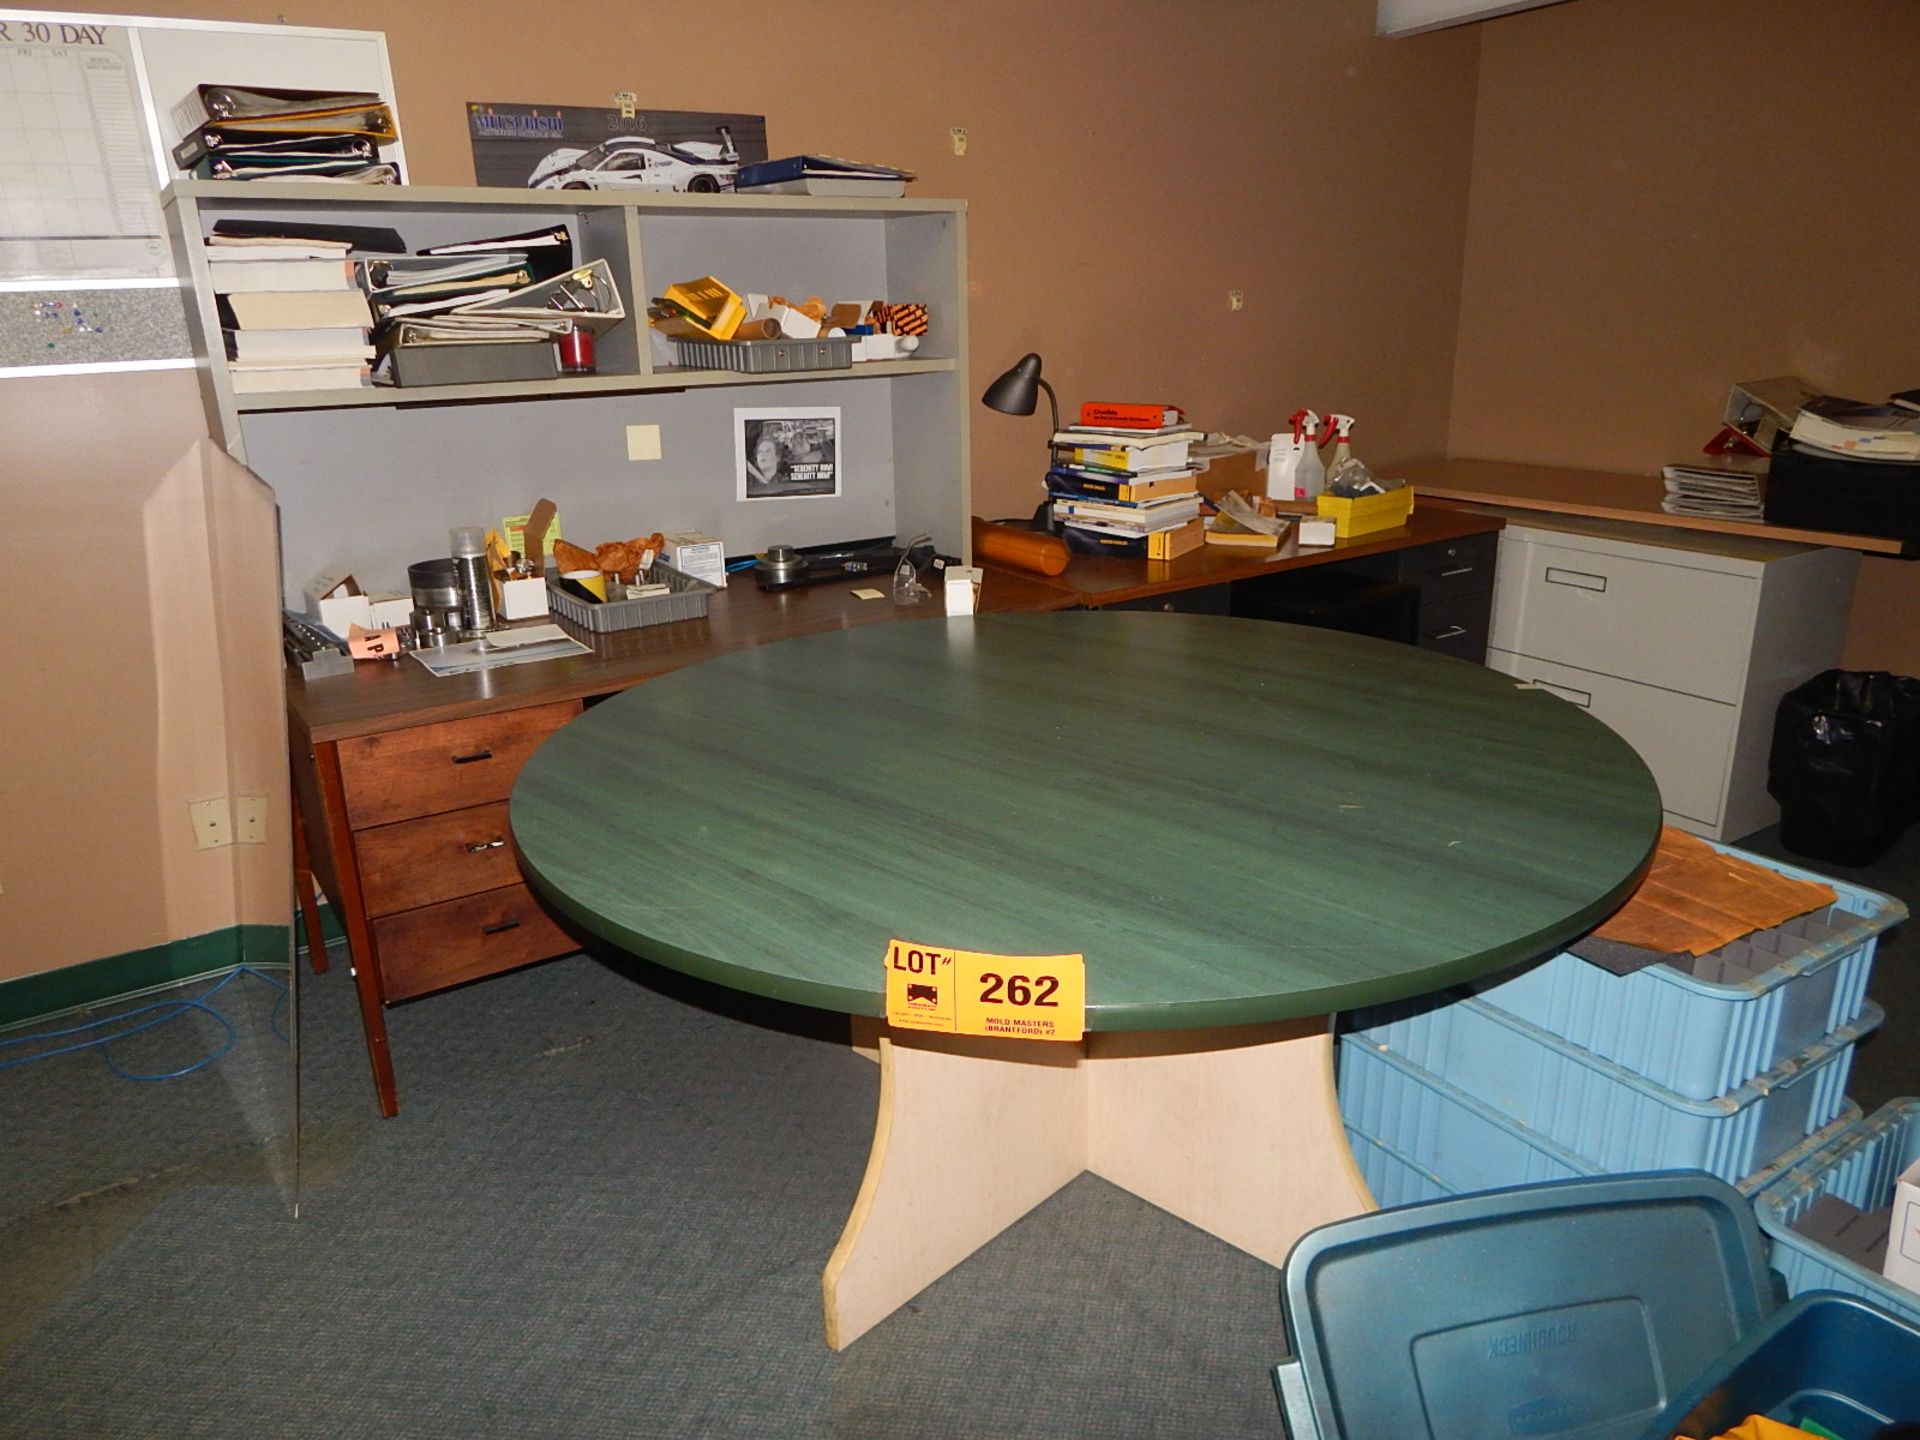 LOT/ OFFICE FURNITURE